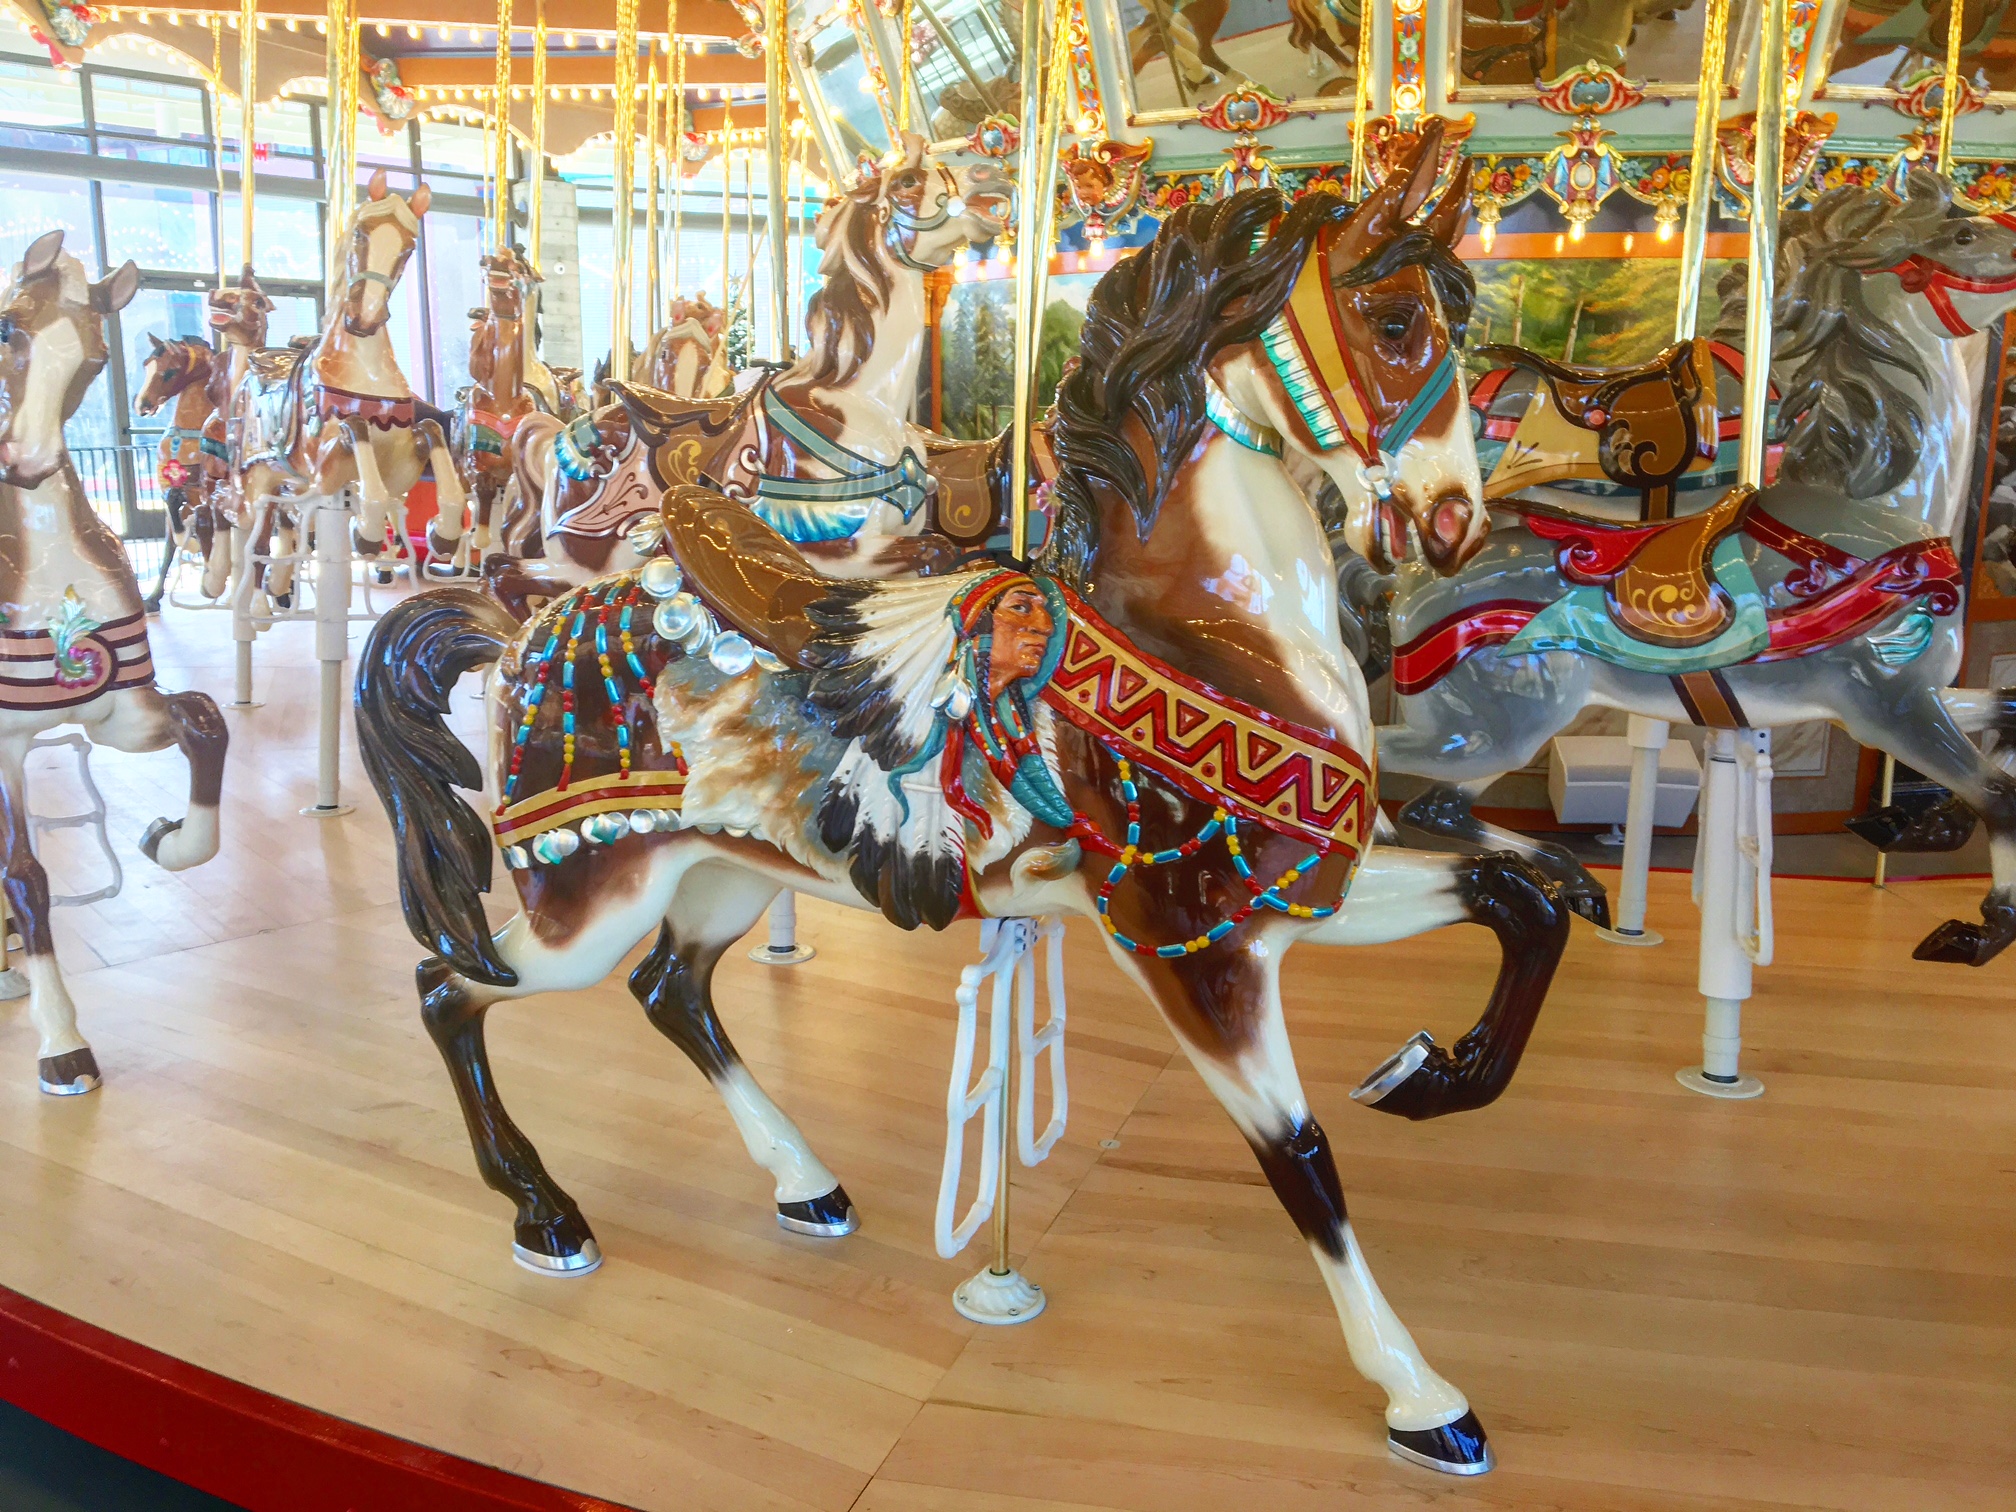 Ride The Grand Carousel At The Children's Museum of Memphis « I Love ...